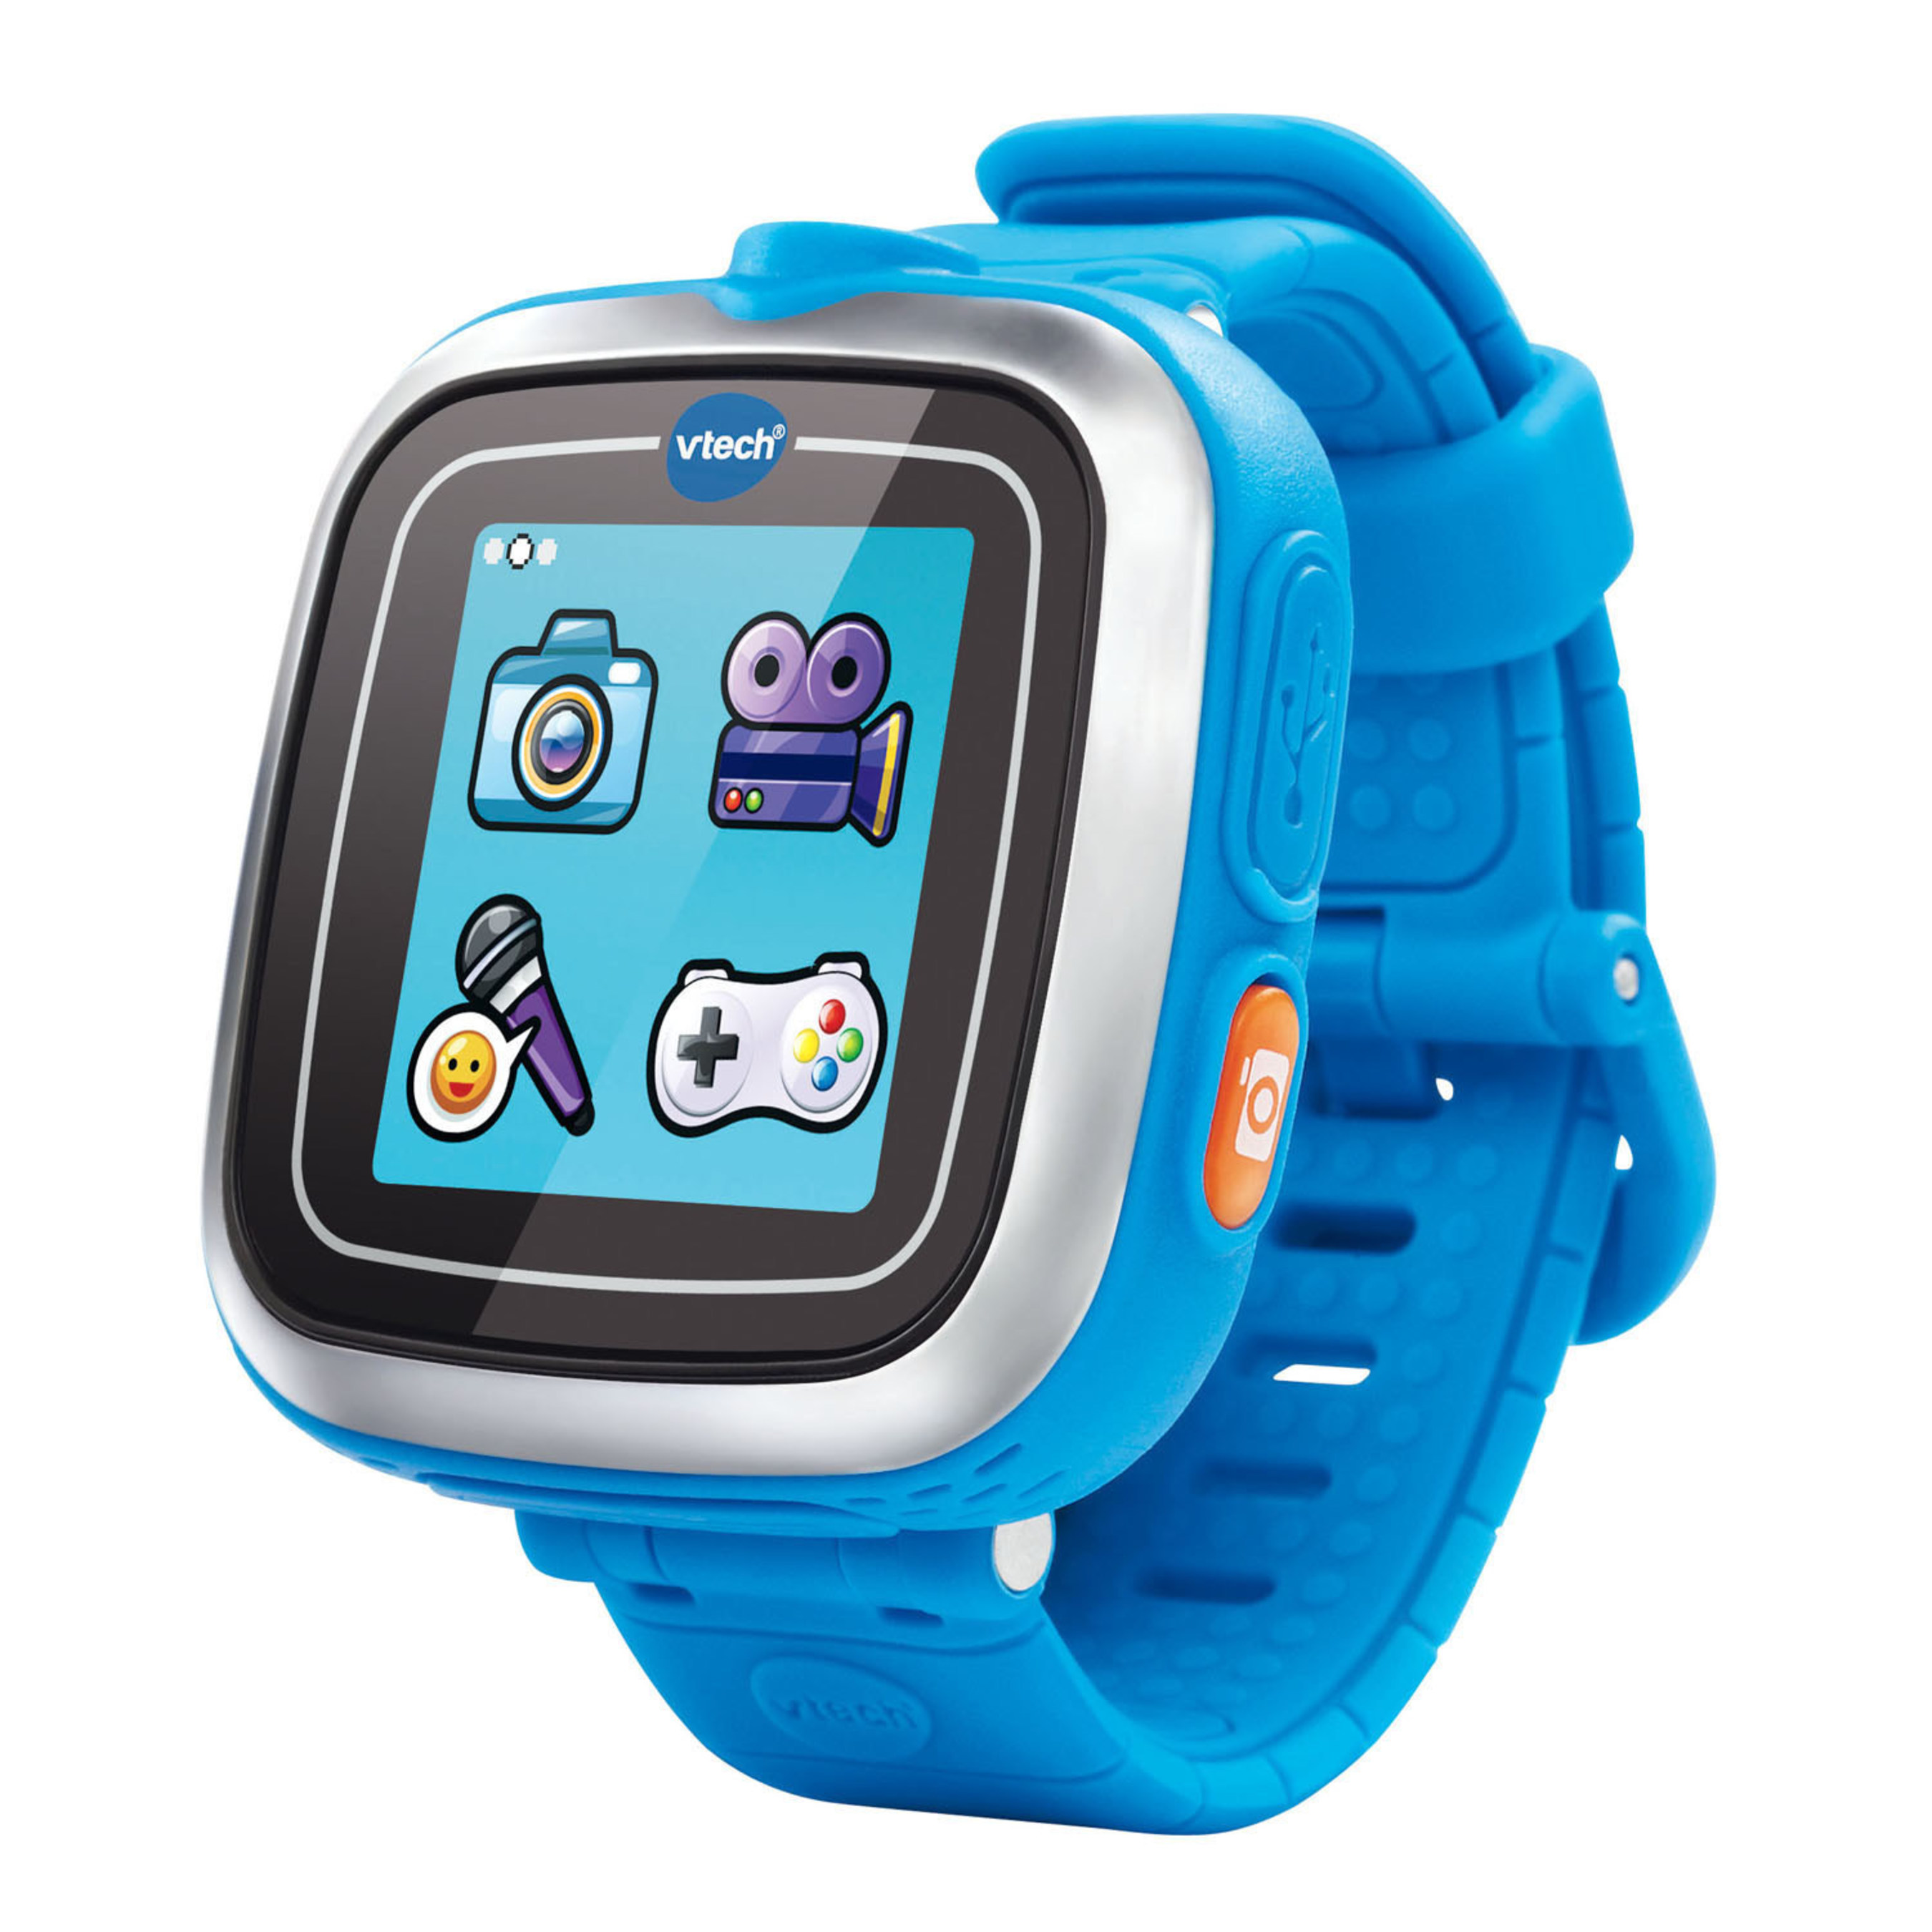 VTech Kidizoom Smartwatch now available in exclusive Sky Blue color on www.vtechkids.com.